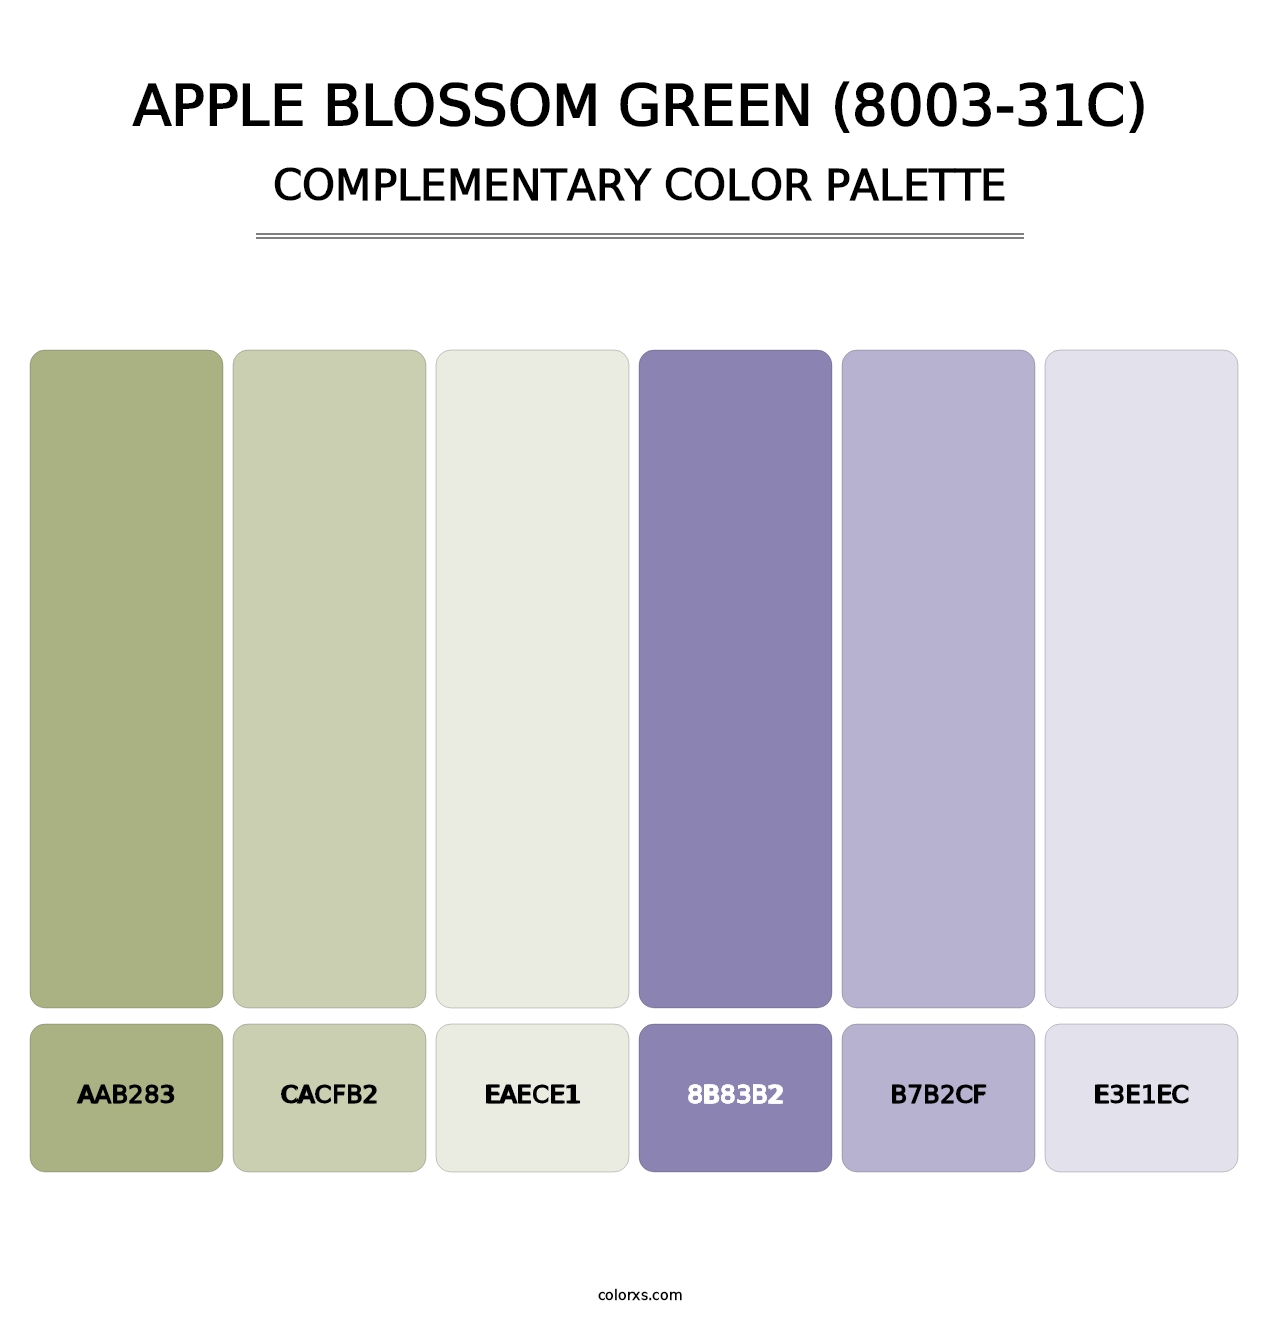 Apple Blossom Green (8003-31C) - Complementary Color Palette